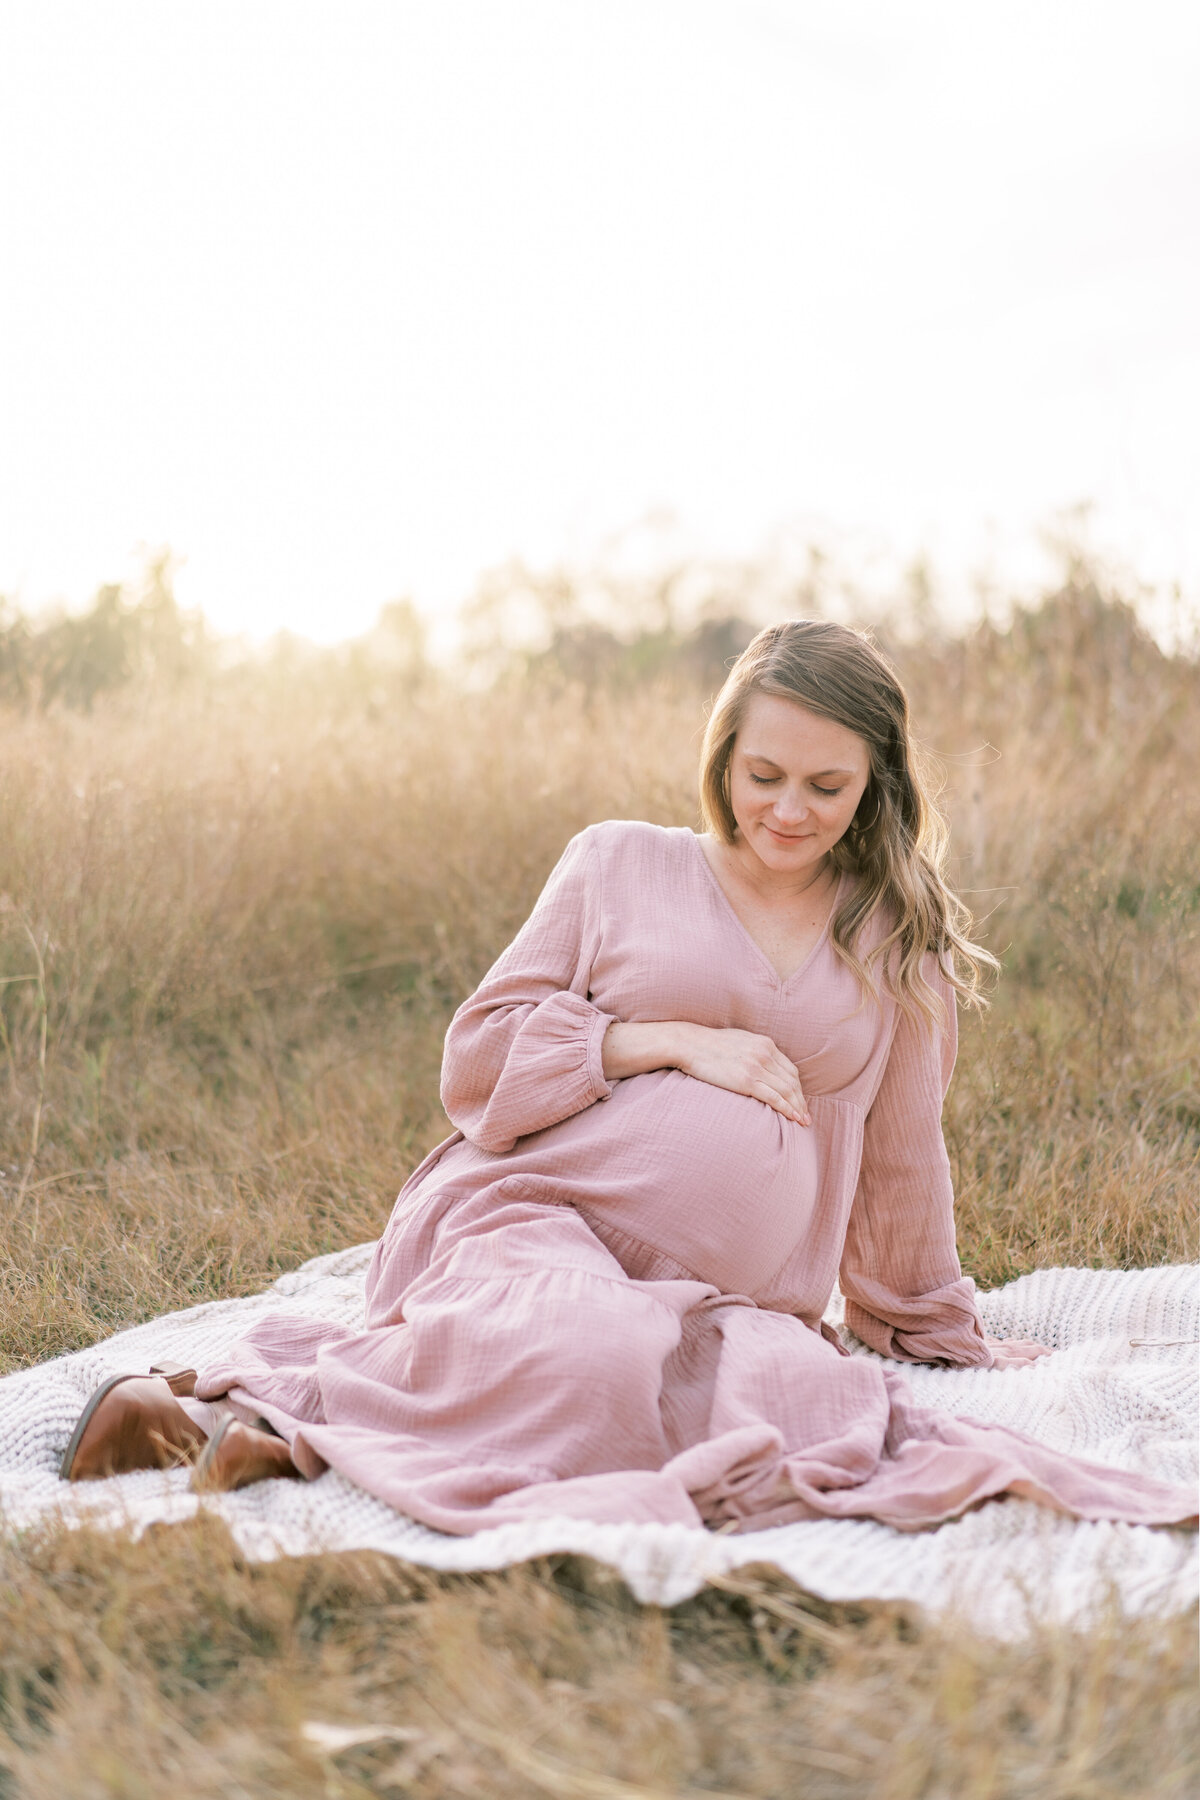 Portrait of a pregnant woman wearing a blush dress sitting atop a waffle blanket in the country during golden hour.